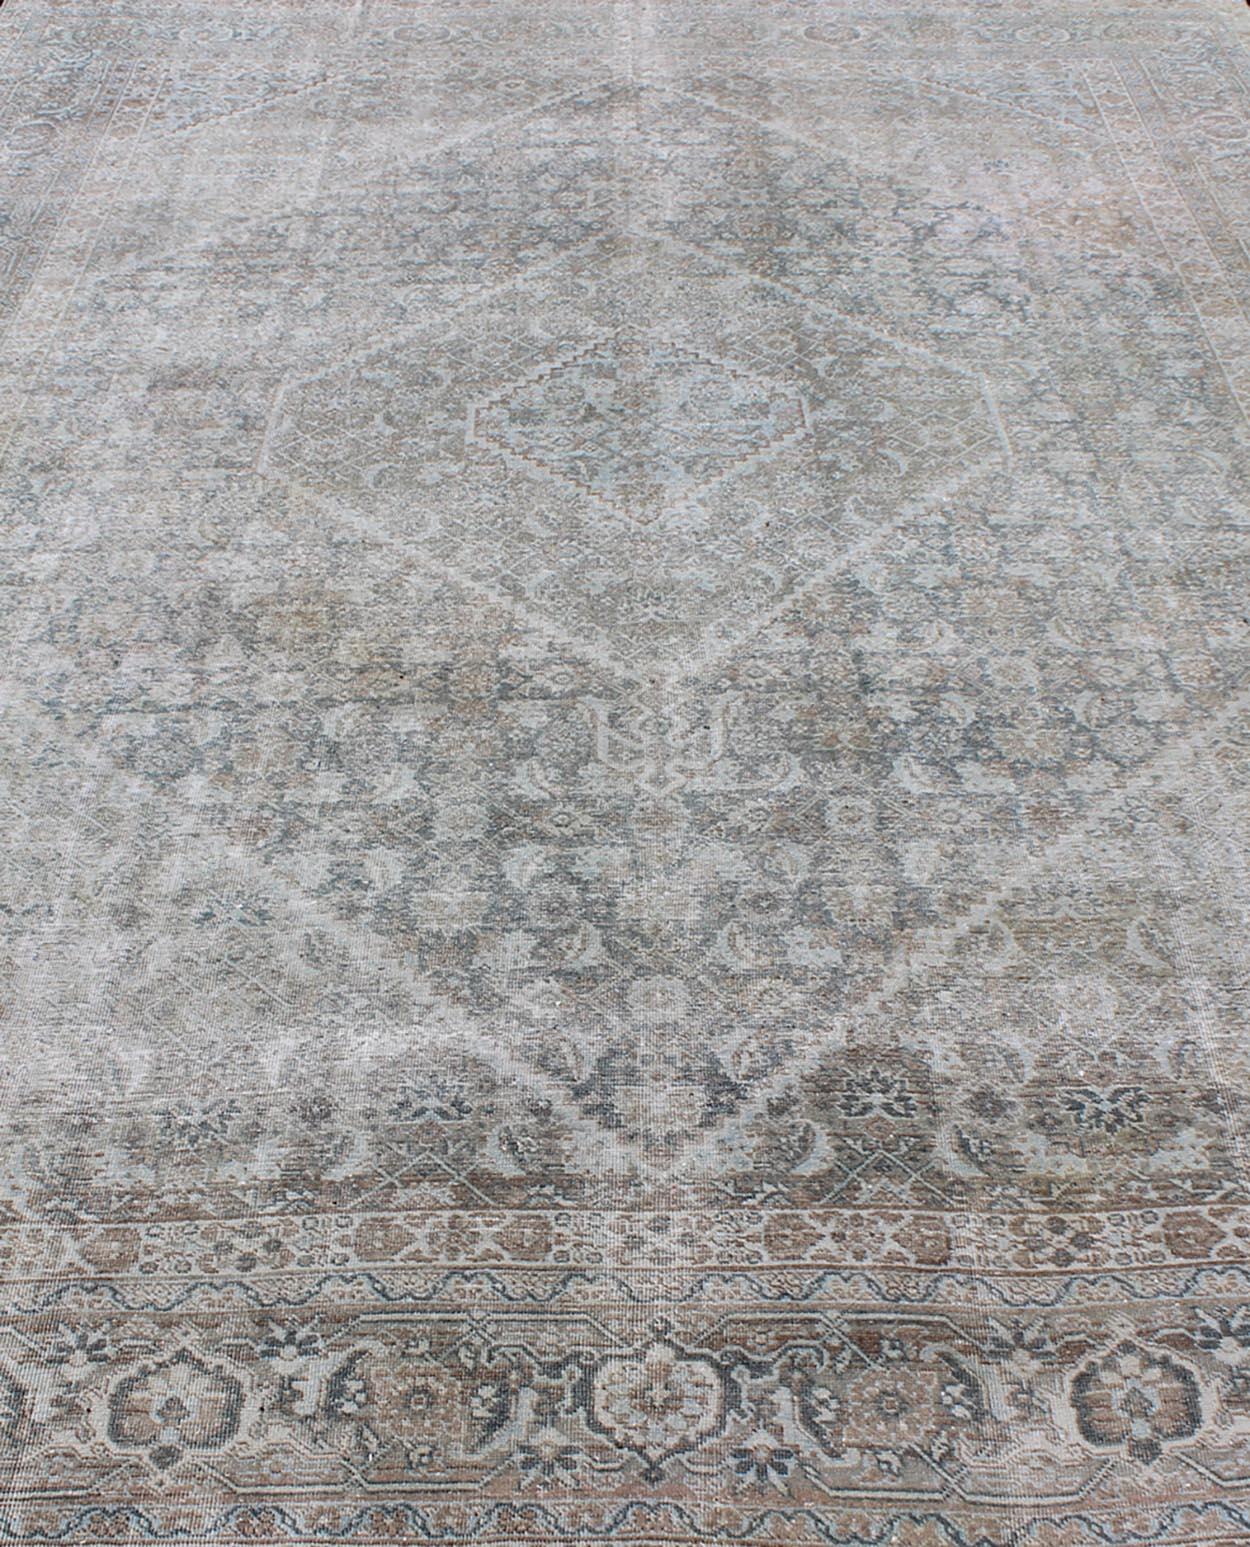 Antique Persian Tabriz Rug in Muted Colors with Layered Medallion Design 4